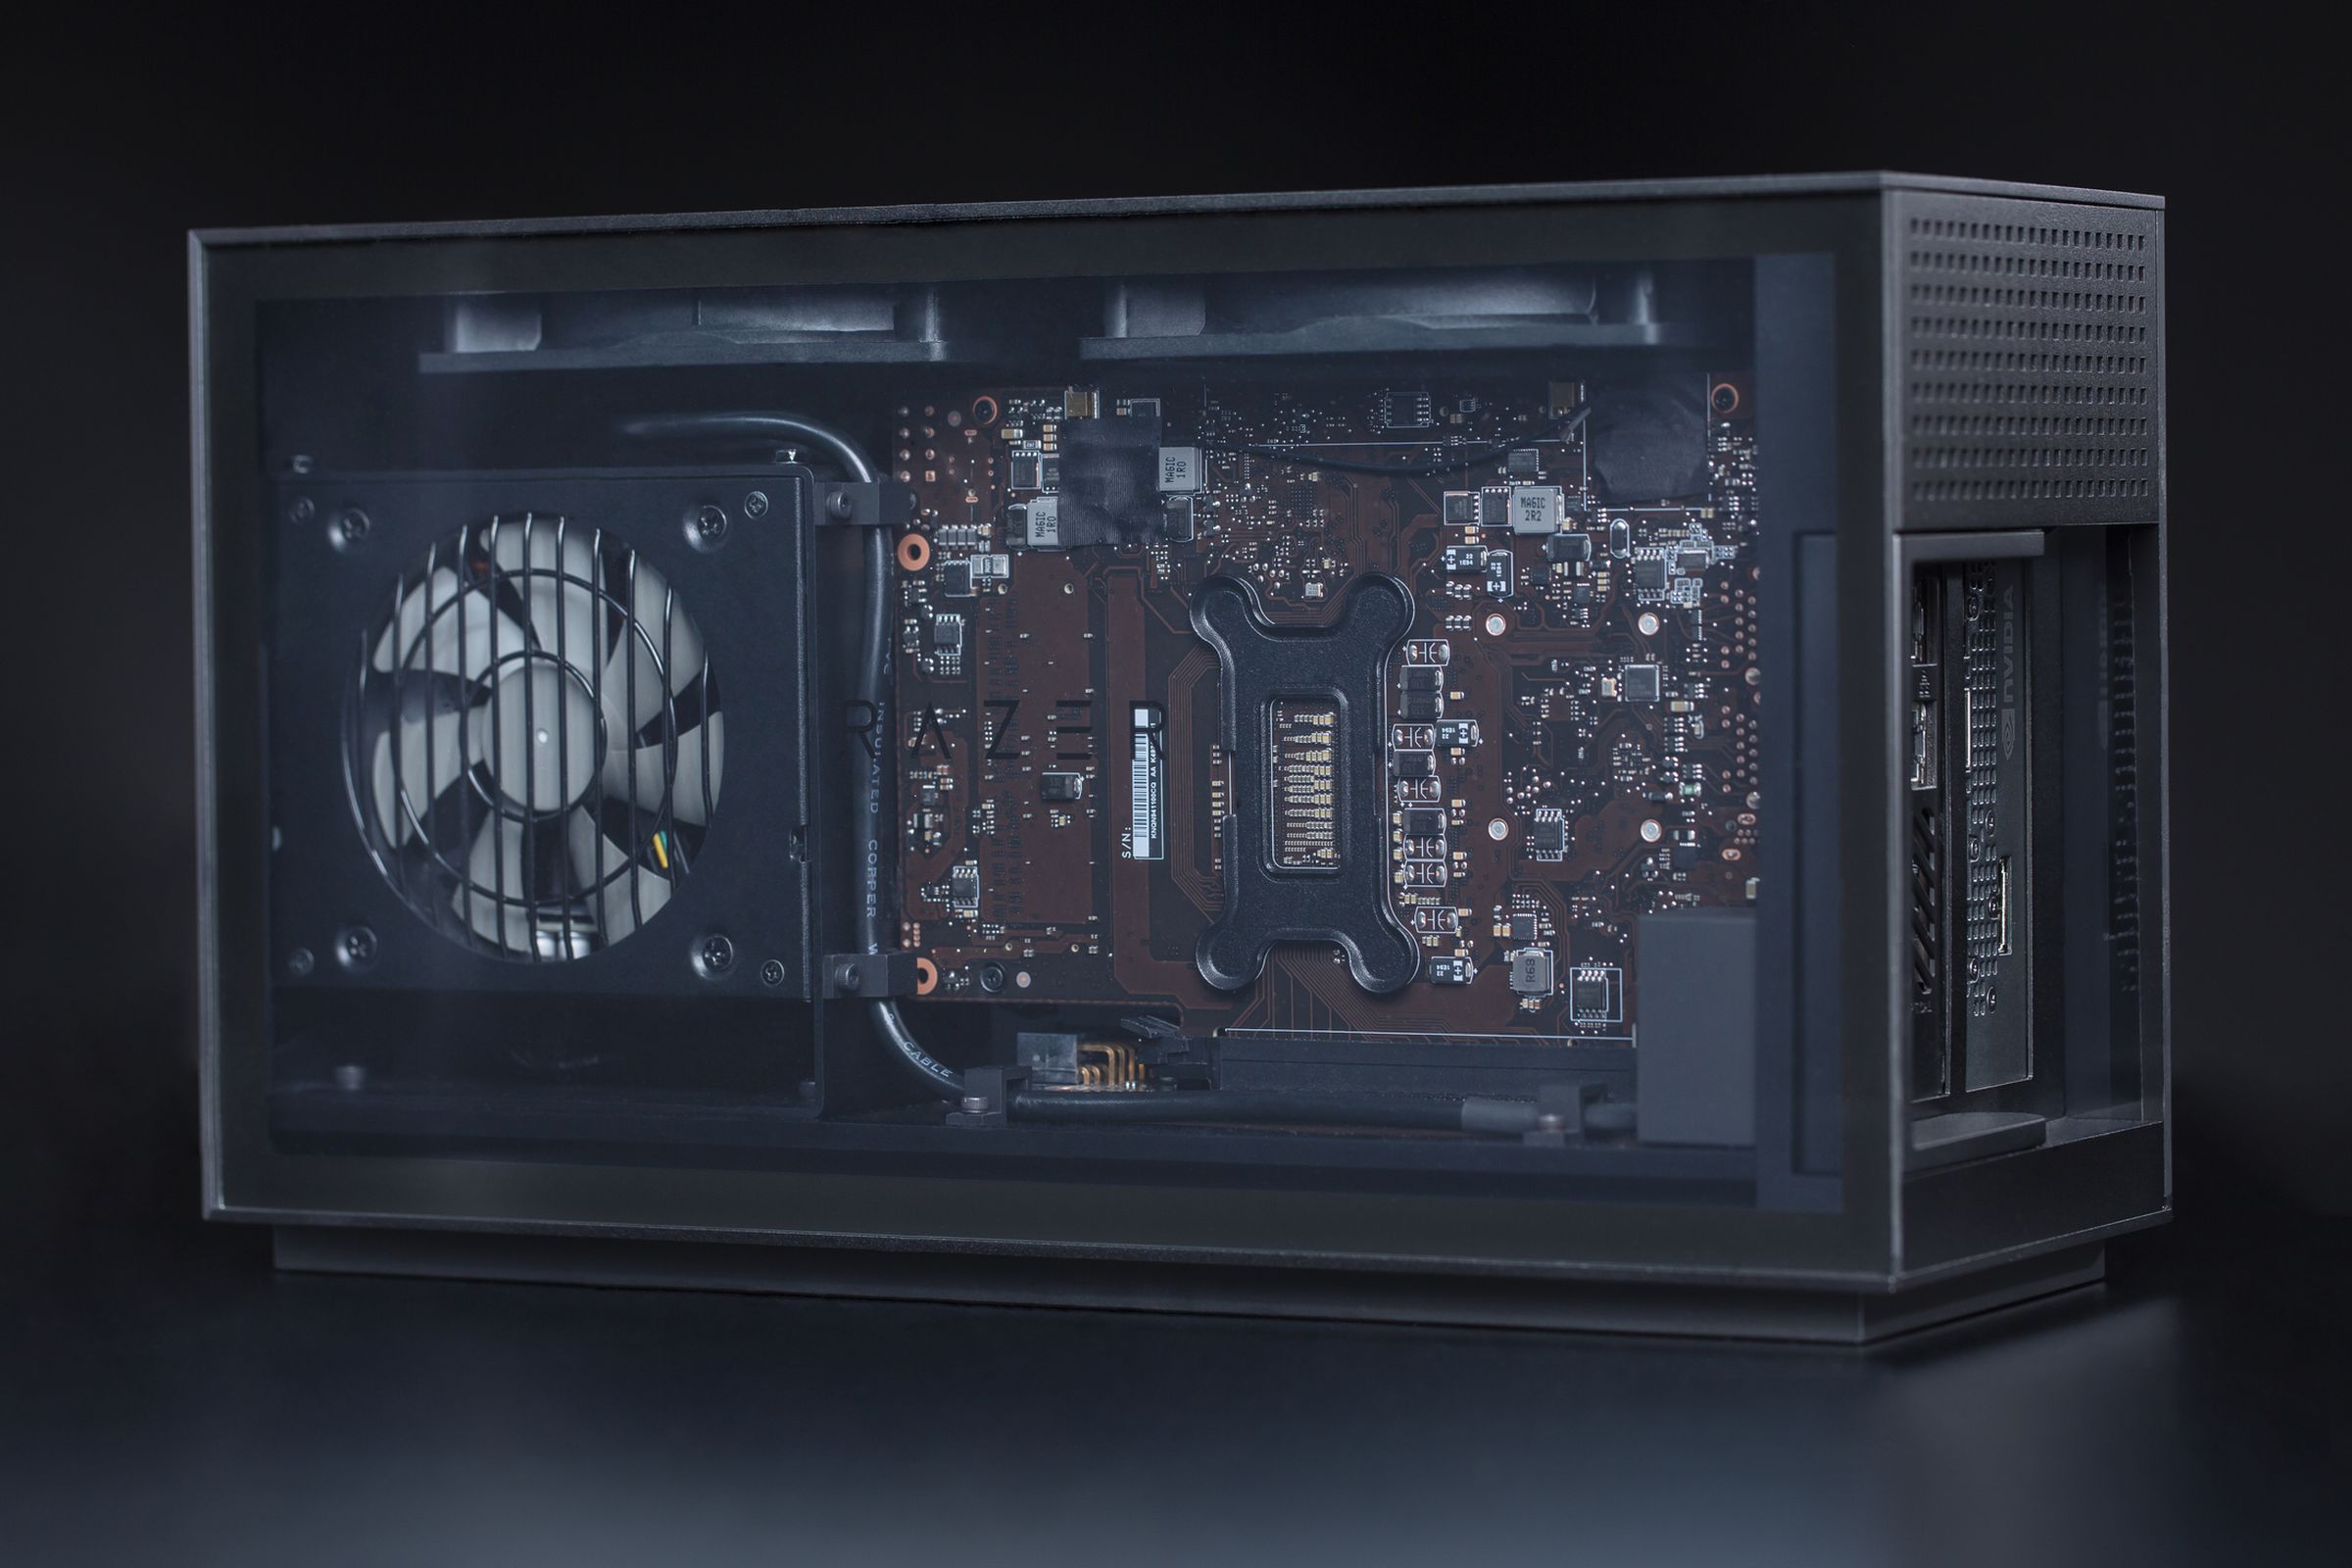 The Tomahawk has a larger, standard SFX power supply compared to Intel’s NUC 9 Extreme.